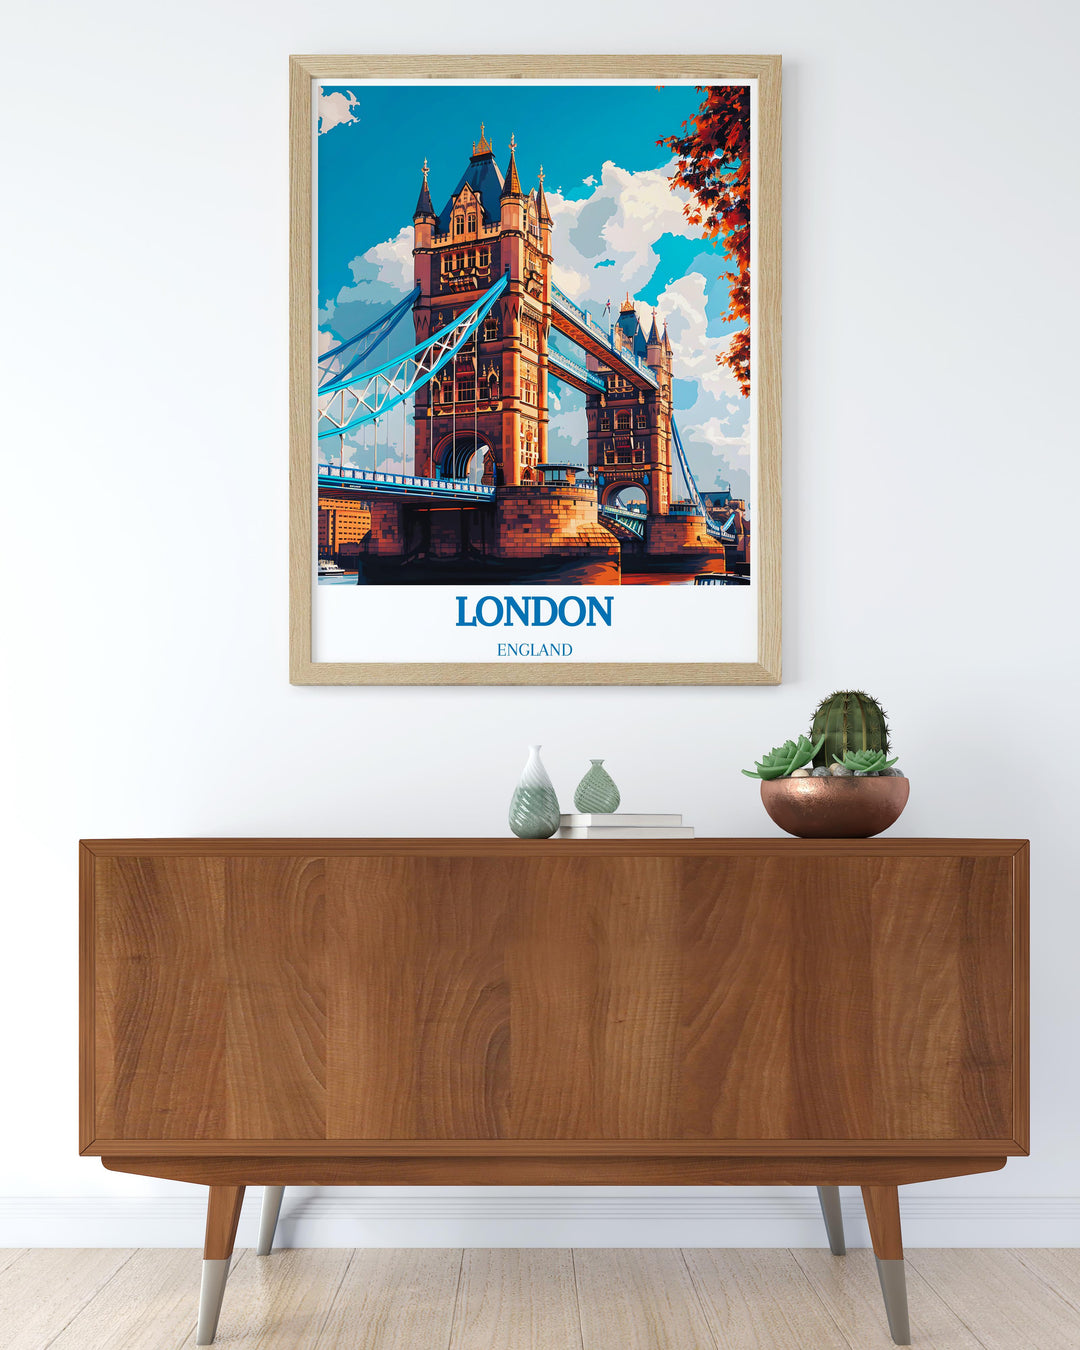 Vintage London travel poster, offering a glimpse into the citys past with a stylish, artistic flare.